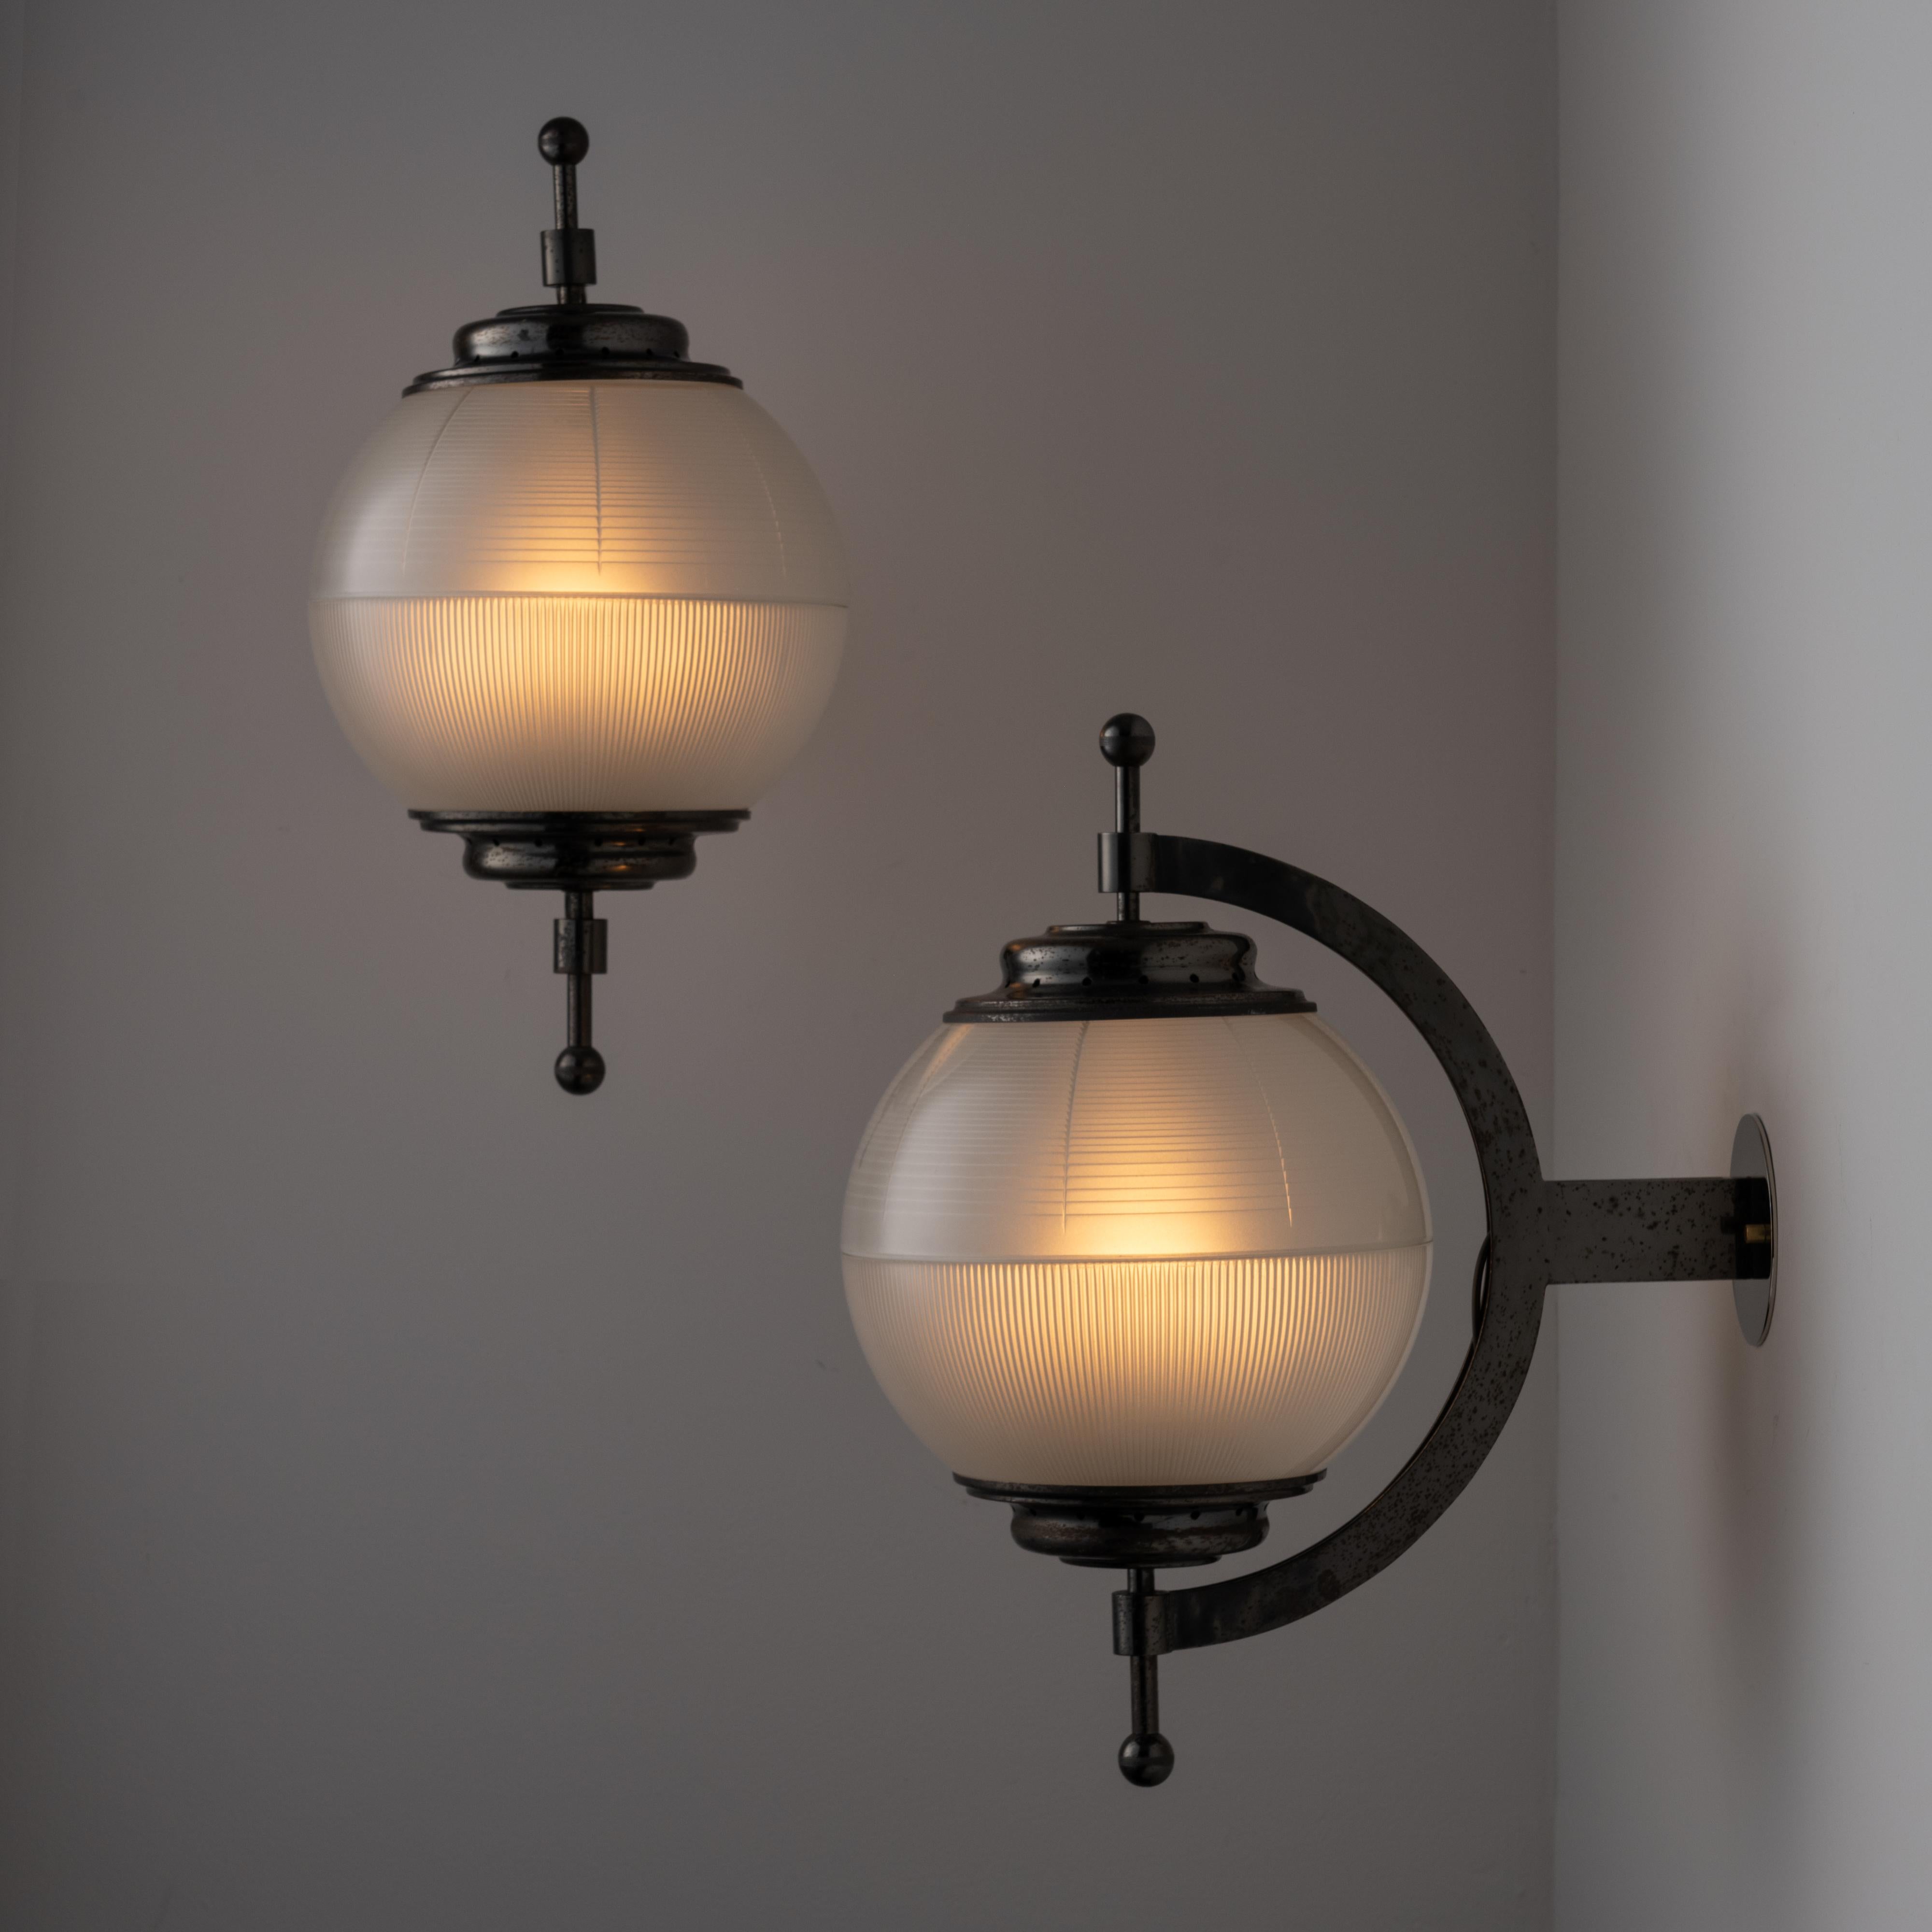 Sconces by Adrasteia. Designed and manufactured in Italy, circa the 1950s. Reeded glass half domes are interspersed by highly detailed blackened polished nickel armatures. Very striking architectural light fixtures. Each fixture holds a single E27